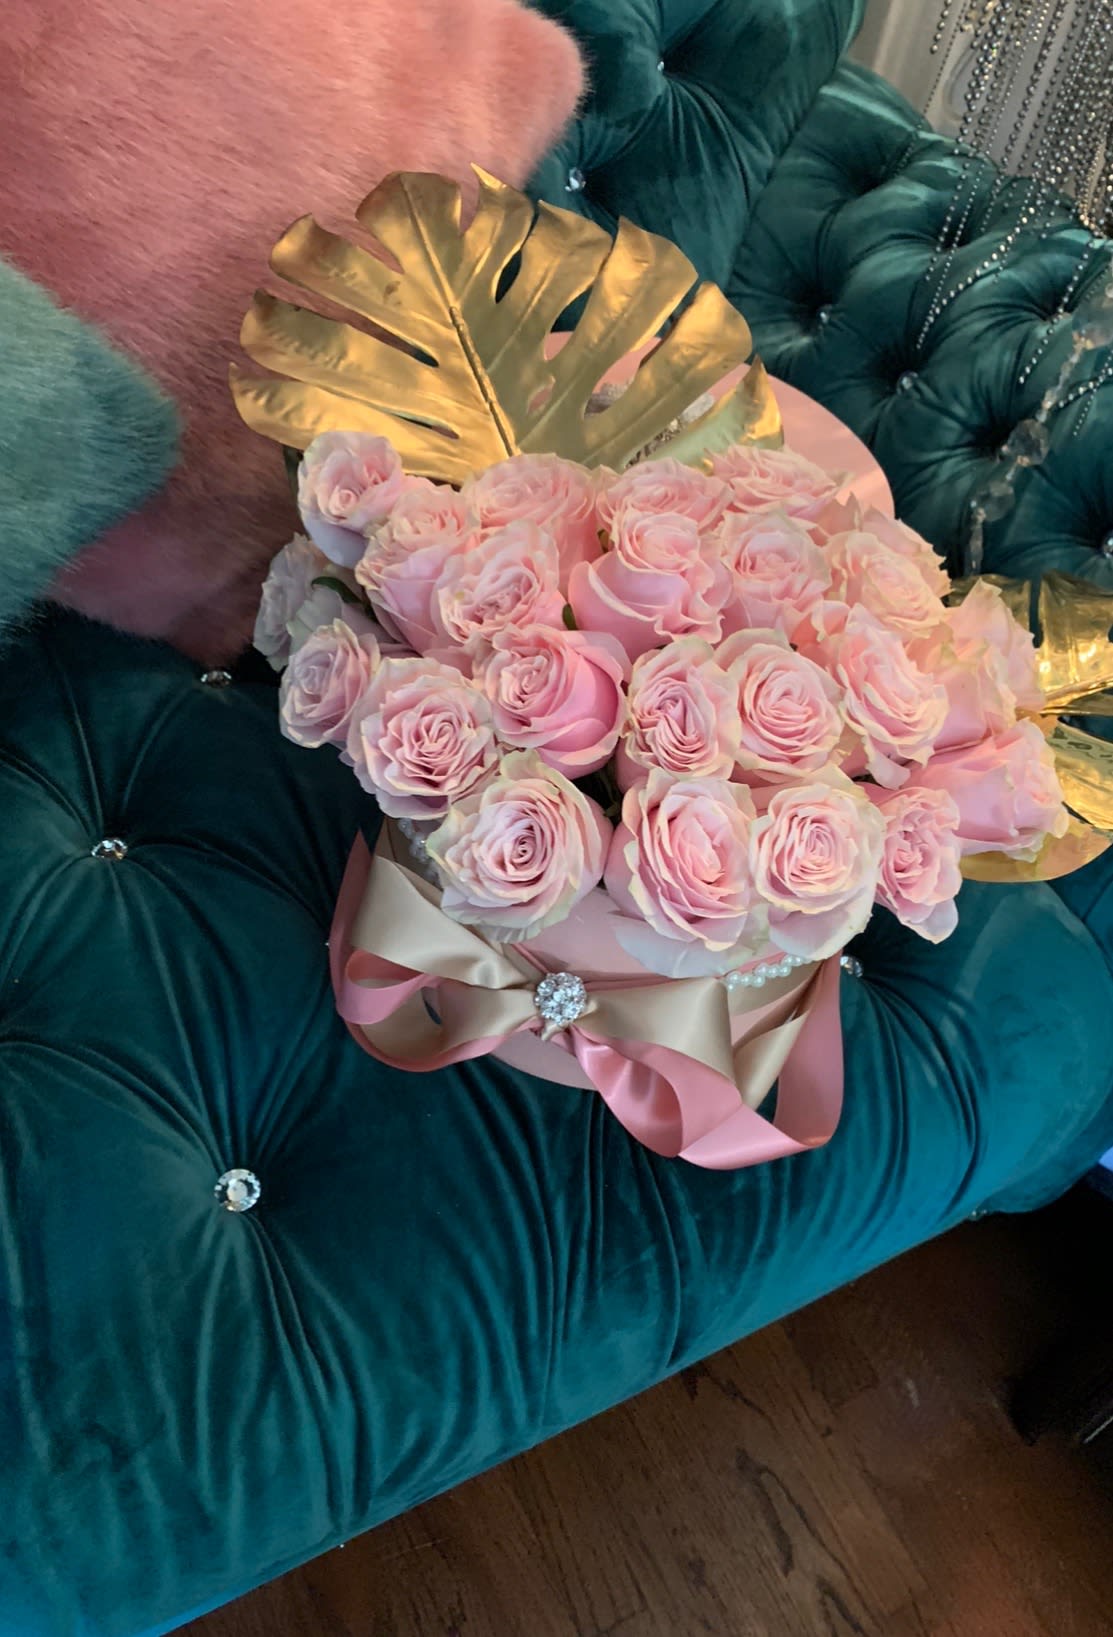 Pink Princesa  - A multitude of precious, soft-petalled, pink roses fit for a princess are charmed with regal, gold leaves adorning this arrangement while a string of faux pearls and brooch lend an elegant touch.